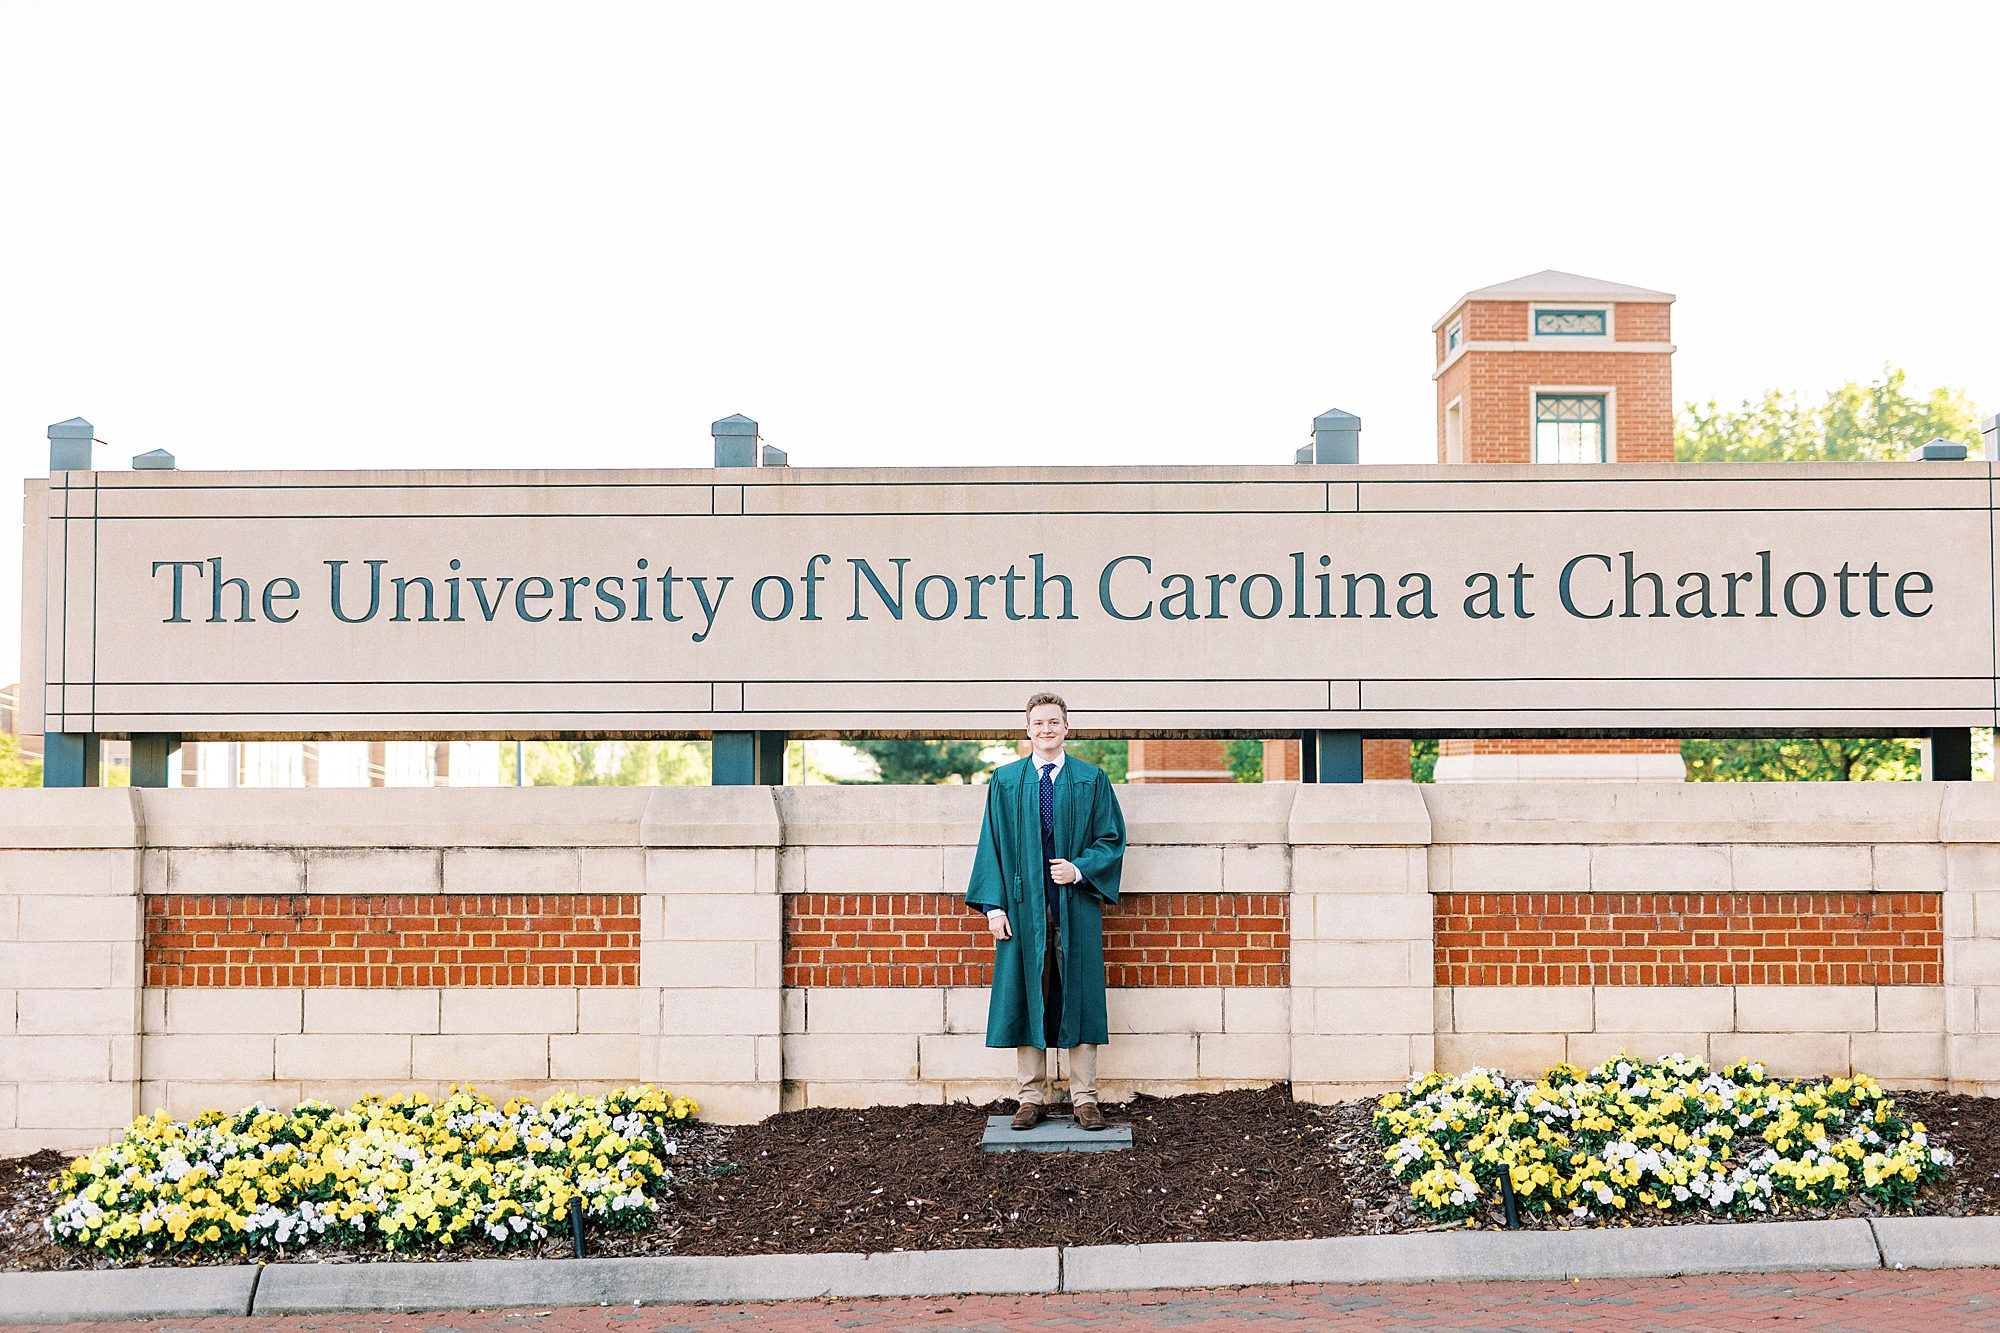 senior poses in green gown by University of North Carolina at Charlotte sign